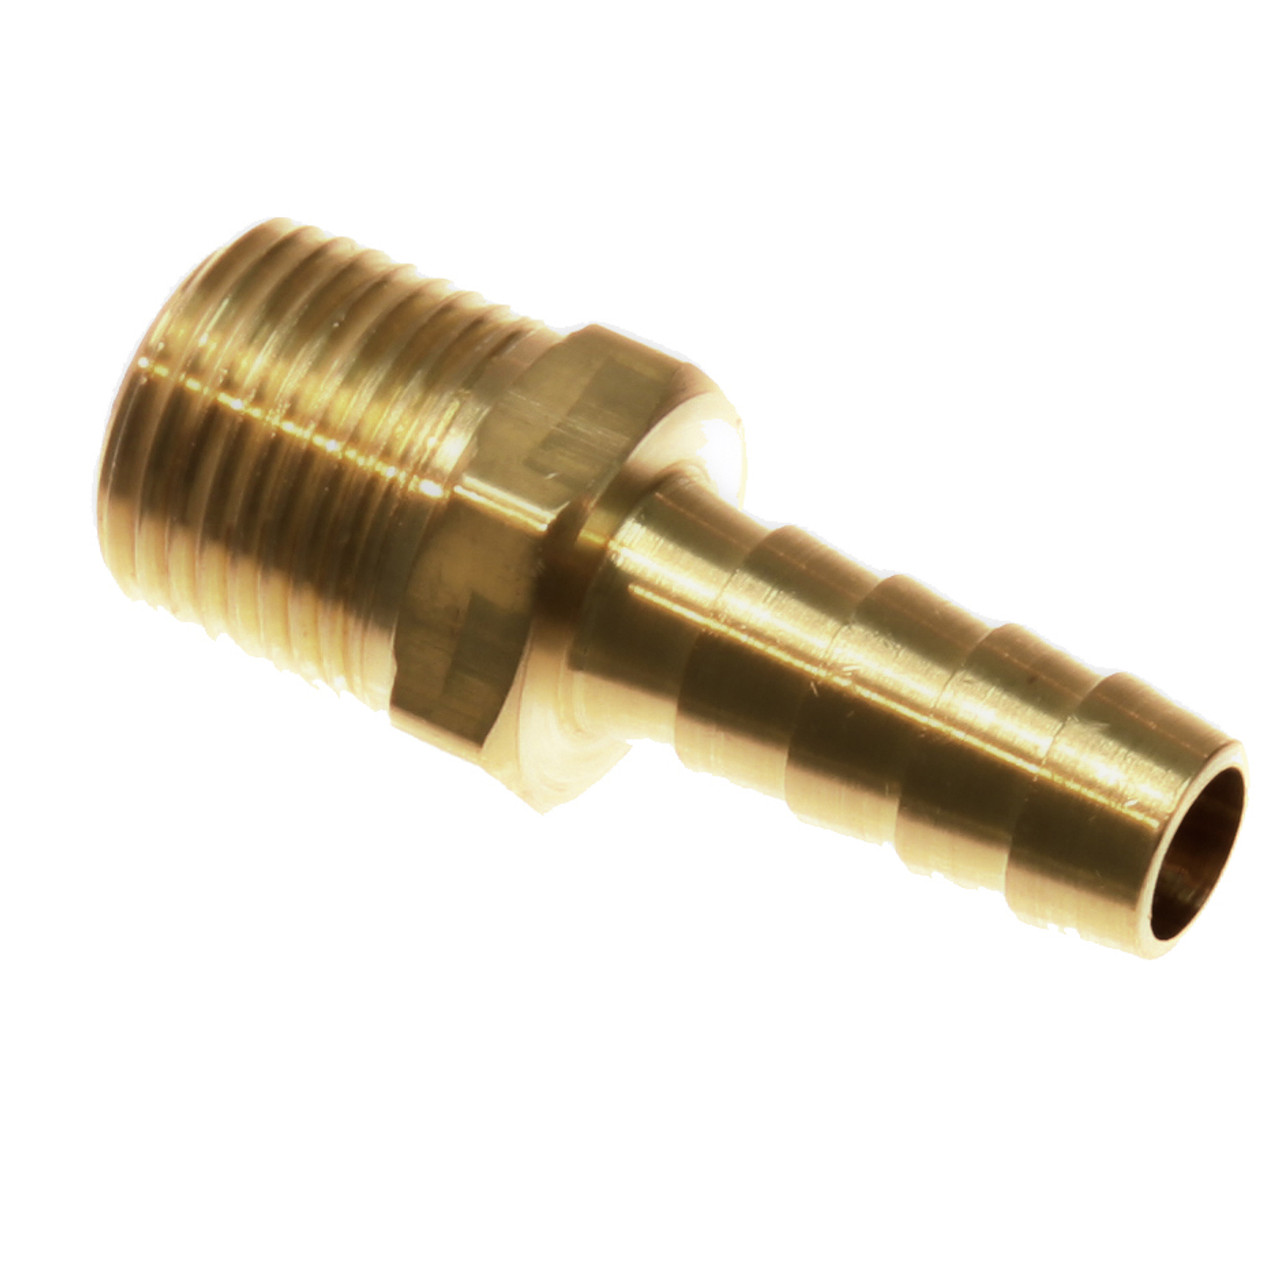 Schnitz Fitting Brass Barb 1/4" Male Pipe x 1/4" Fuel Line